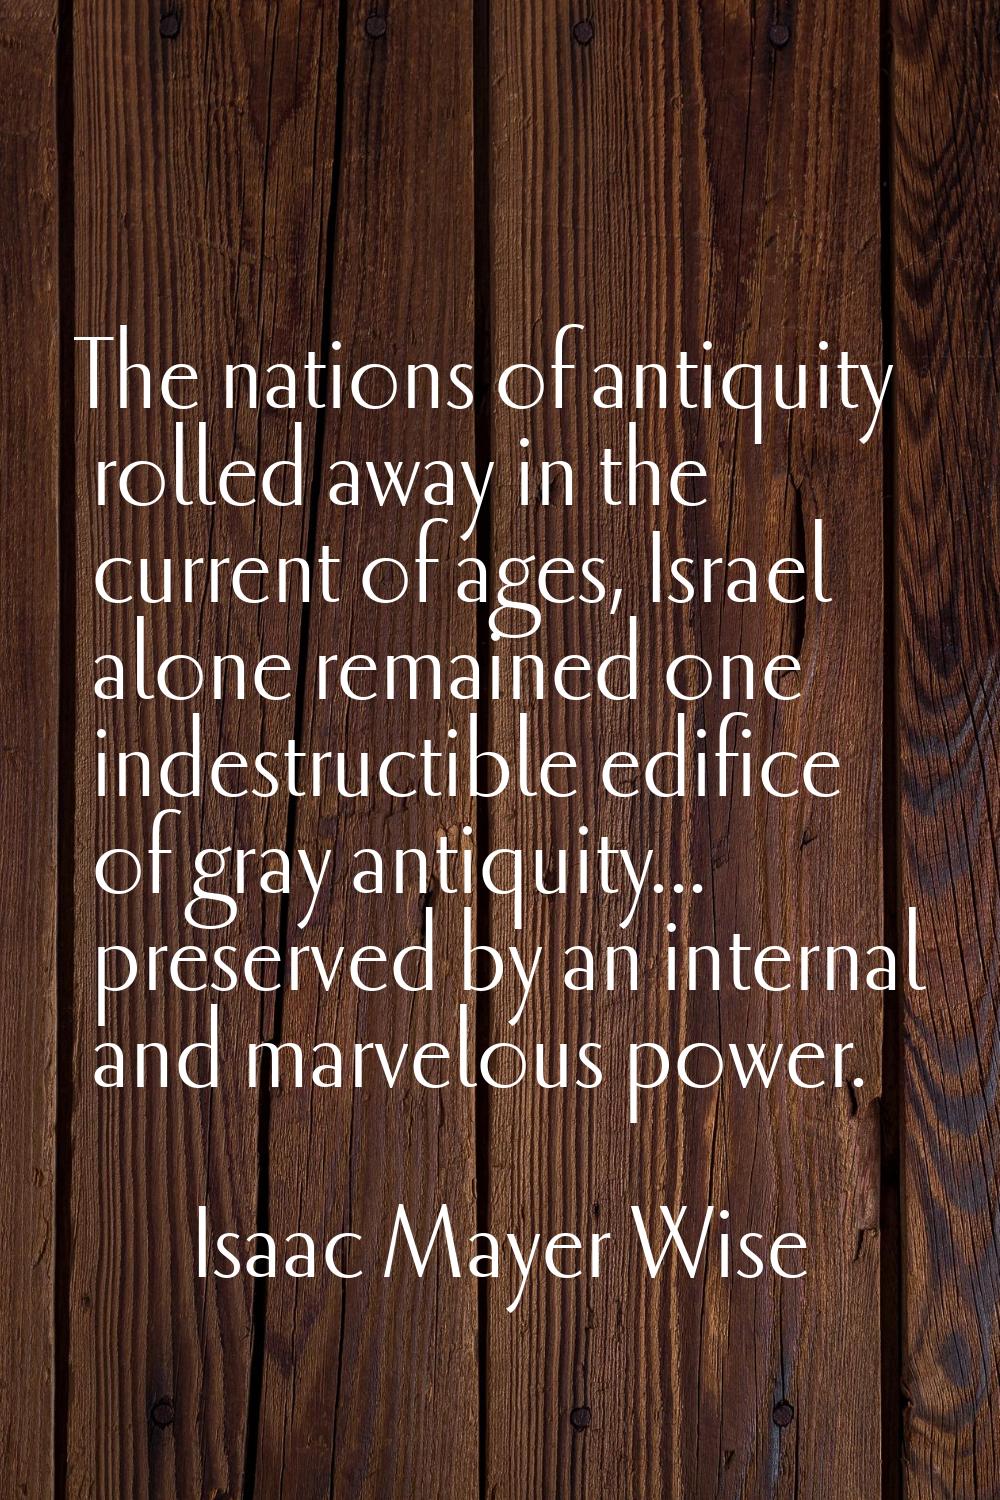 The nations of antiquity rolled away in the current of ages, Israel alone remained one indestructib